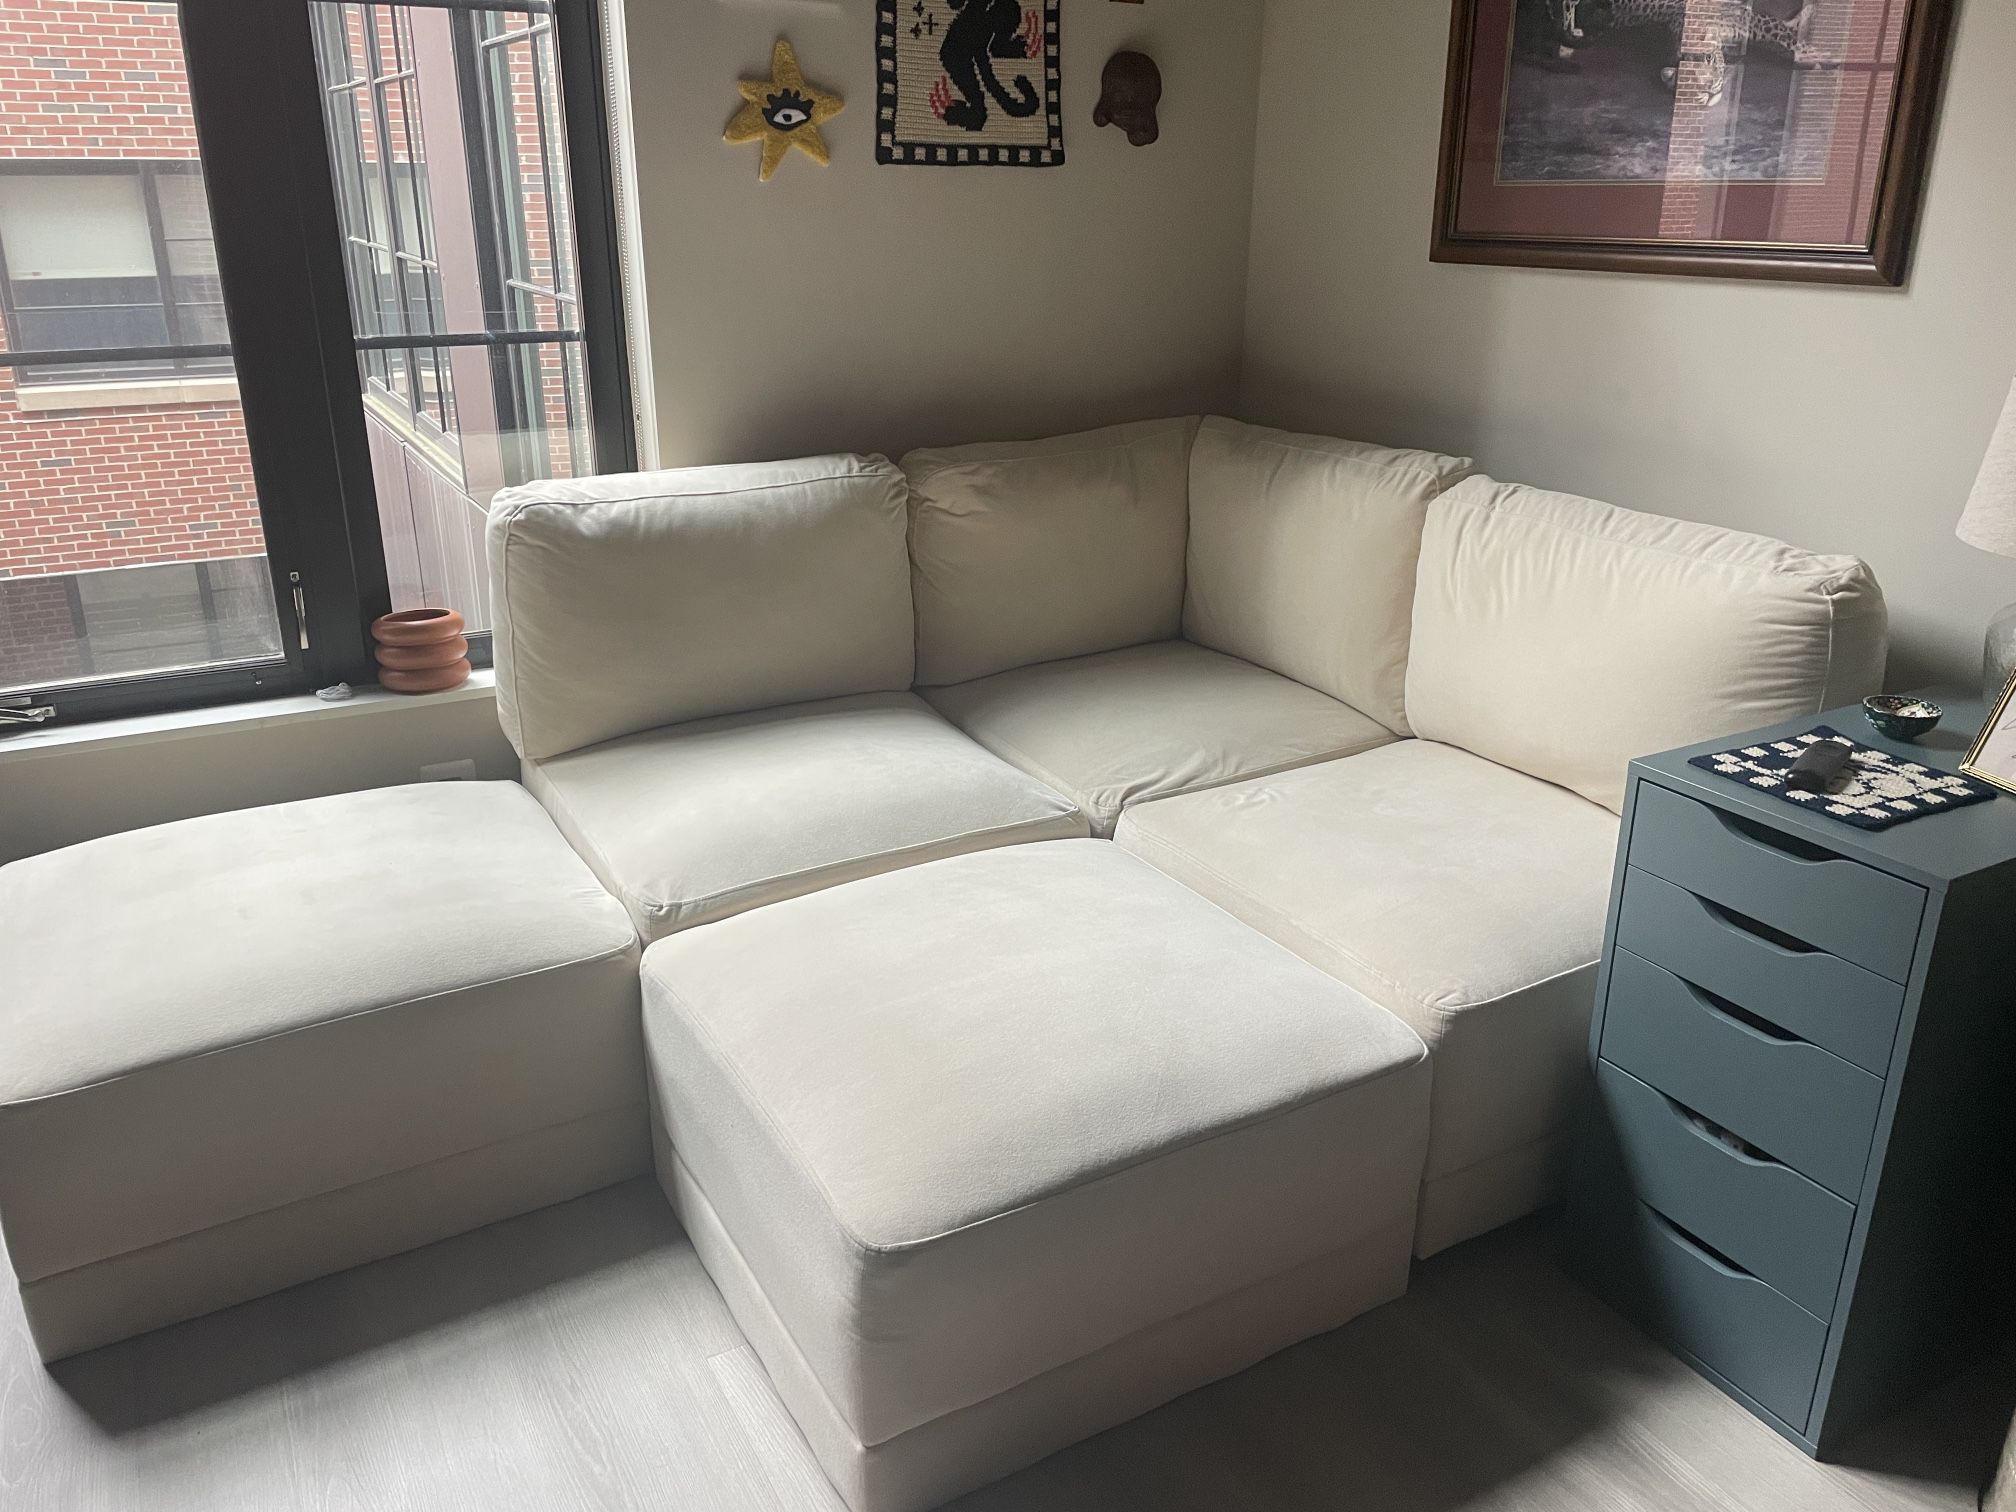 Modular Cream Sectional Sofa Couch - 6 pieces (2 ottomans and 4 sofa seats)